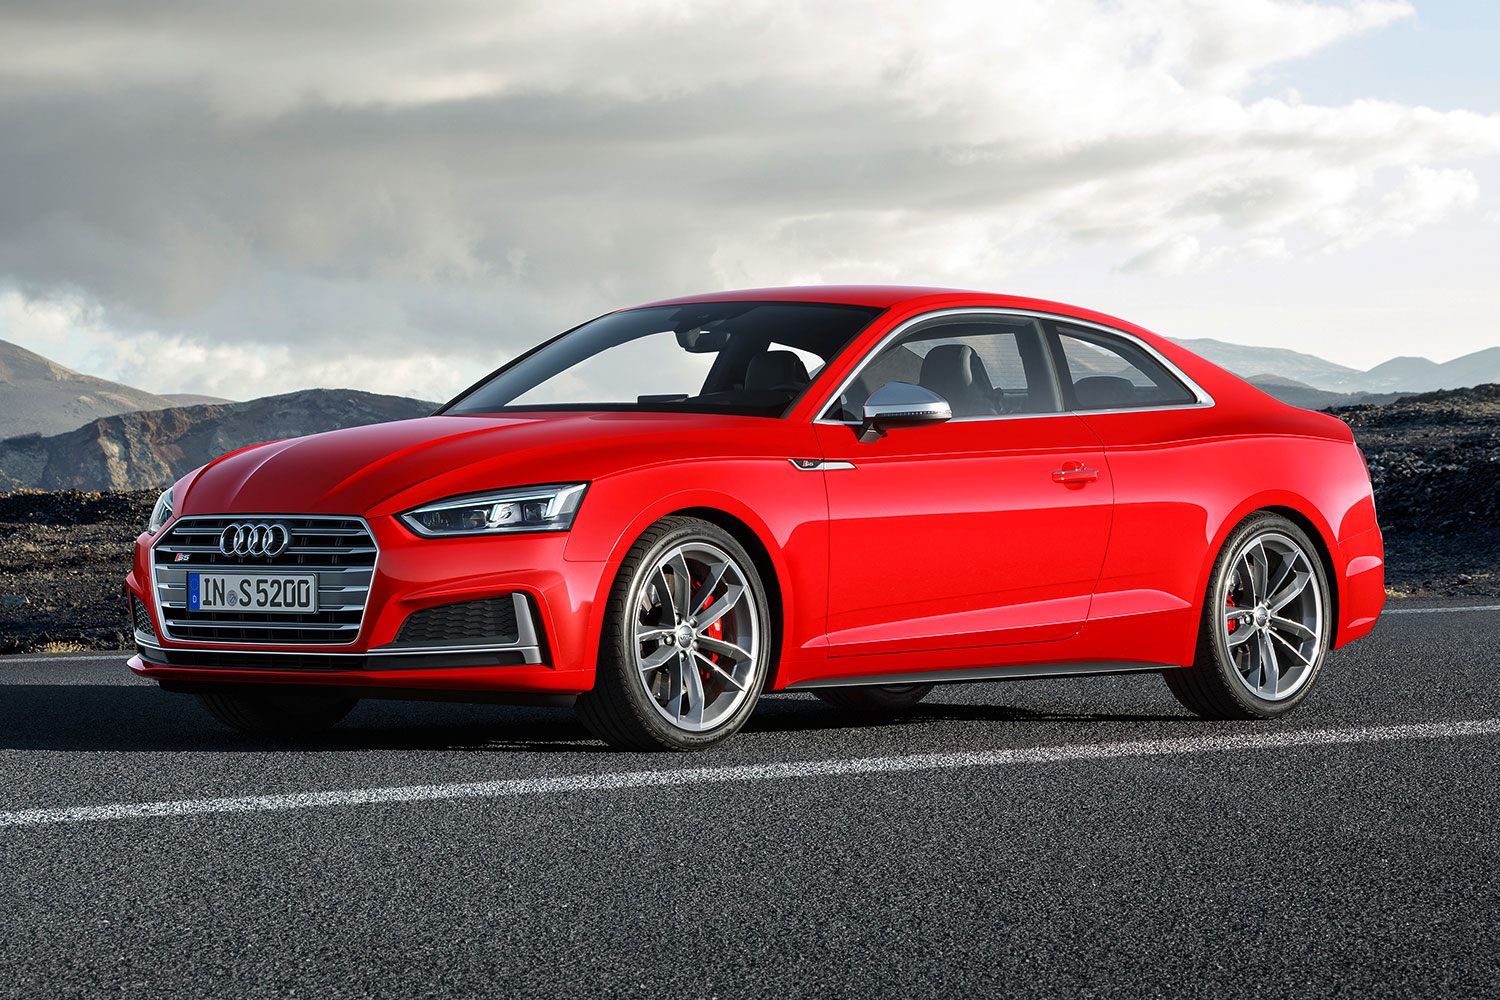 2017 audi a5 news pictures specs performance s5 coupe 0011